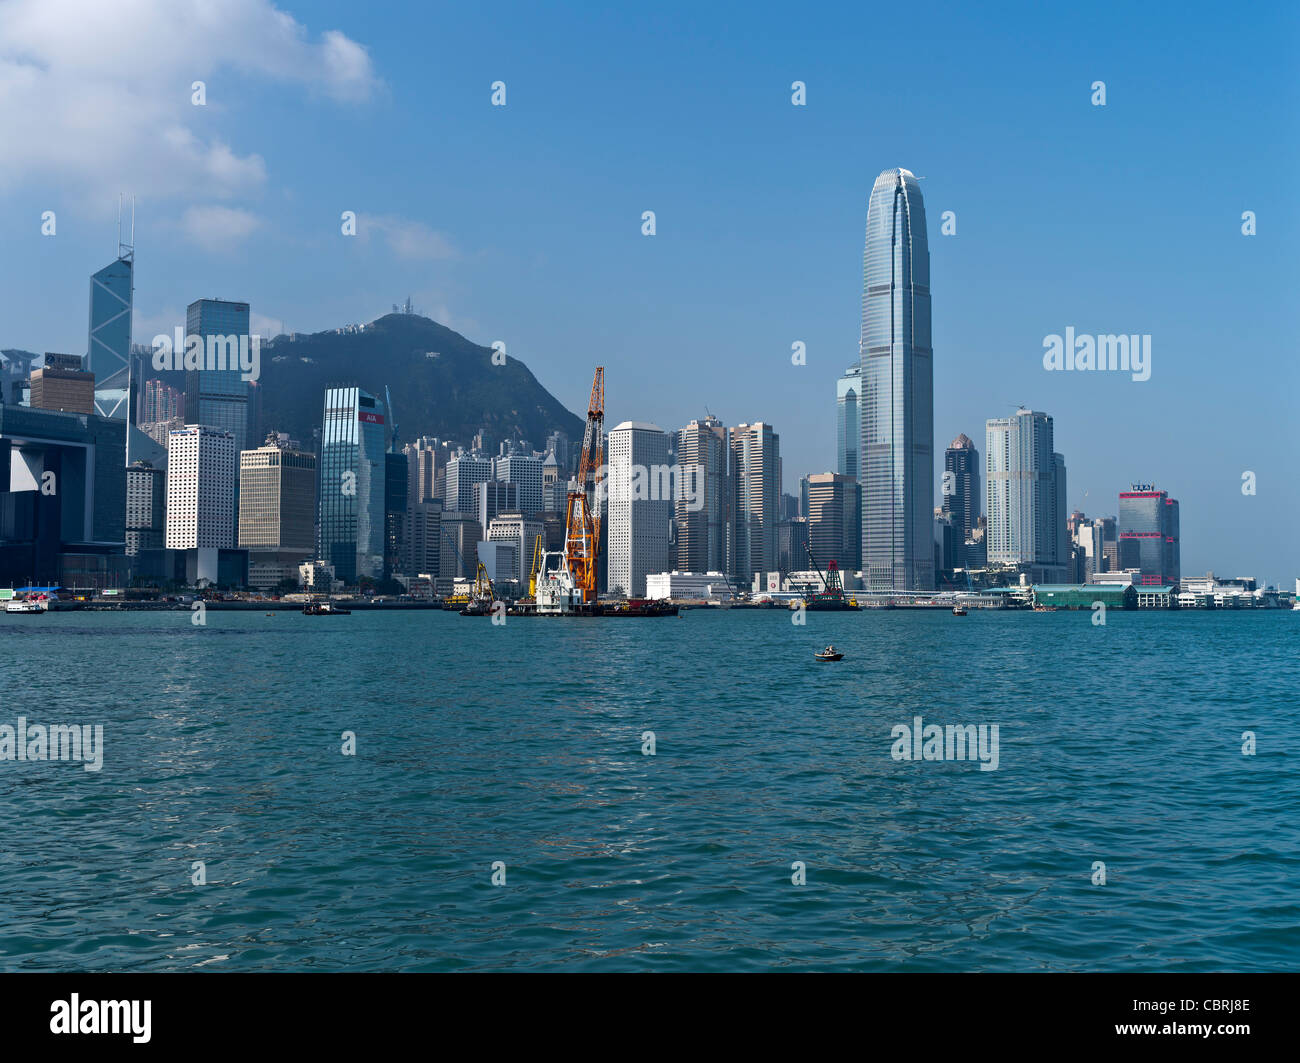 dh Victoria Harbour CENTRAL HONG KONG The Peak HK buildings skyline skyscrapers IFC 2 city day cityscapes blue sky Stock Photo